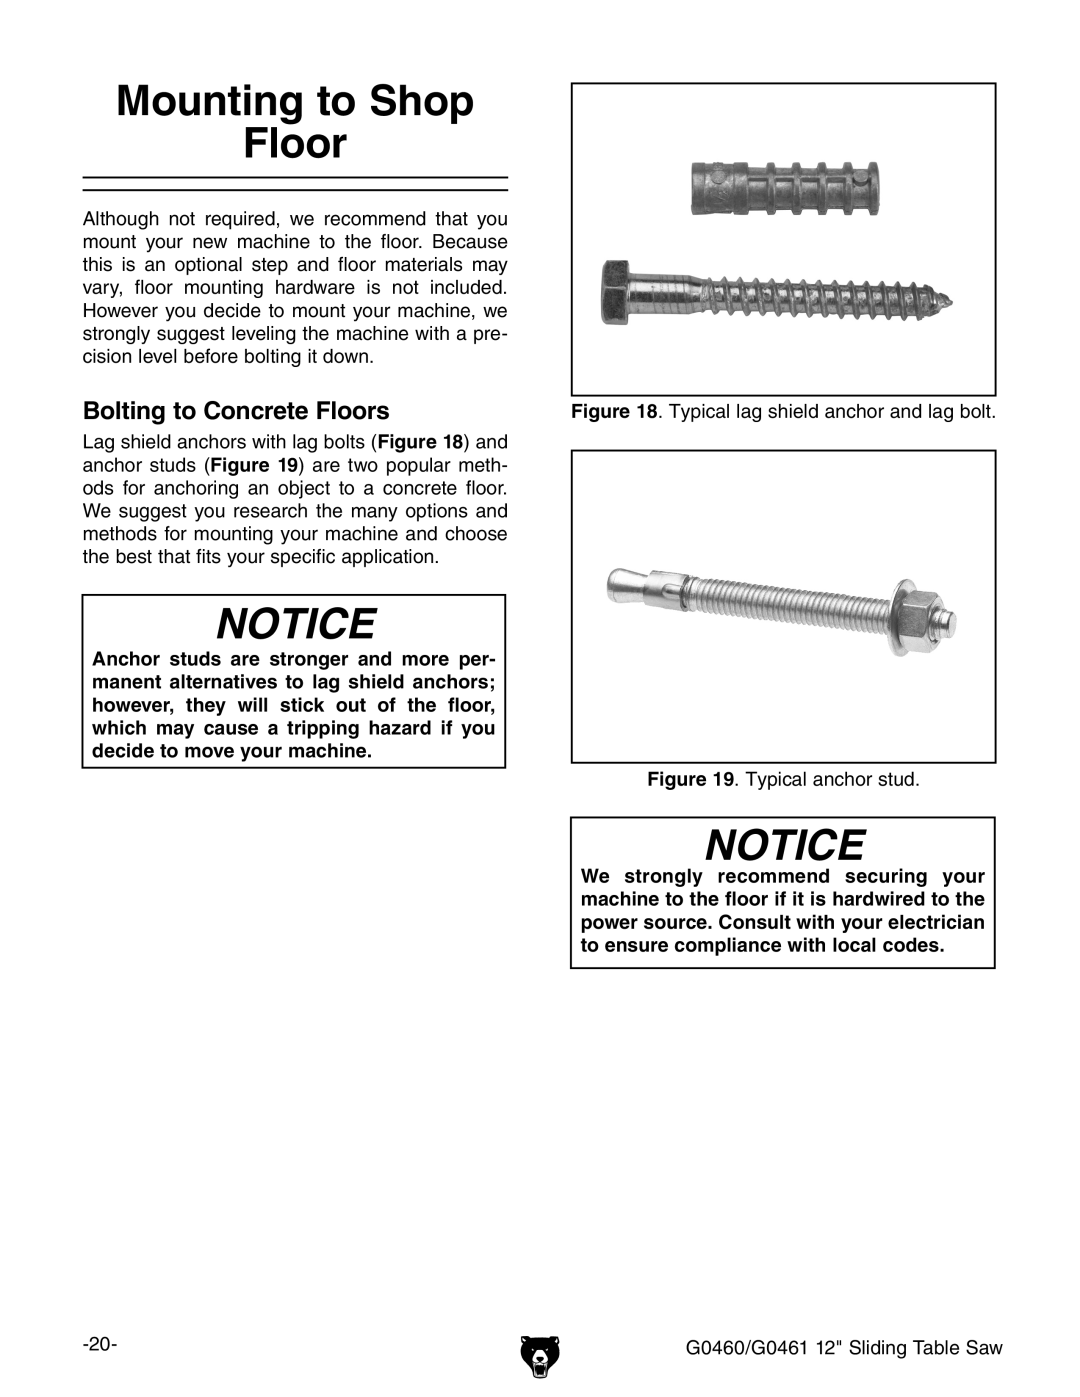 Grizzly G0460, G0461 owner manual Mounting to Shop Floor, Bolting to Concrete Floors 